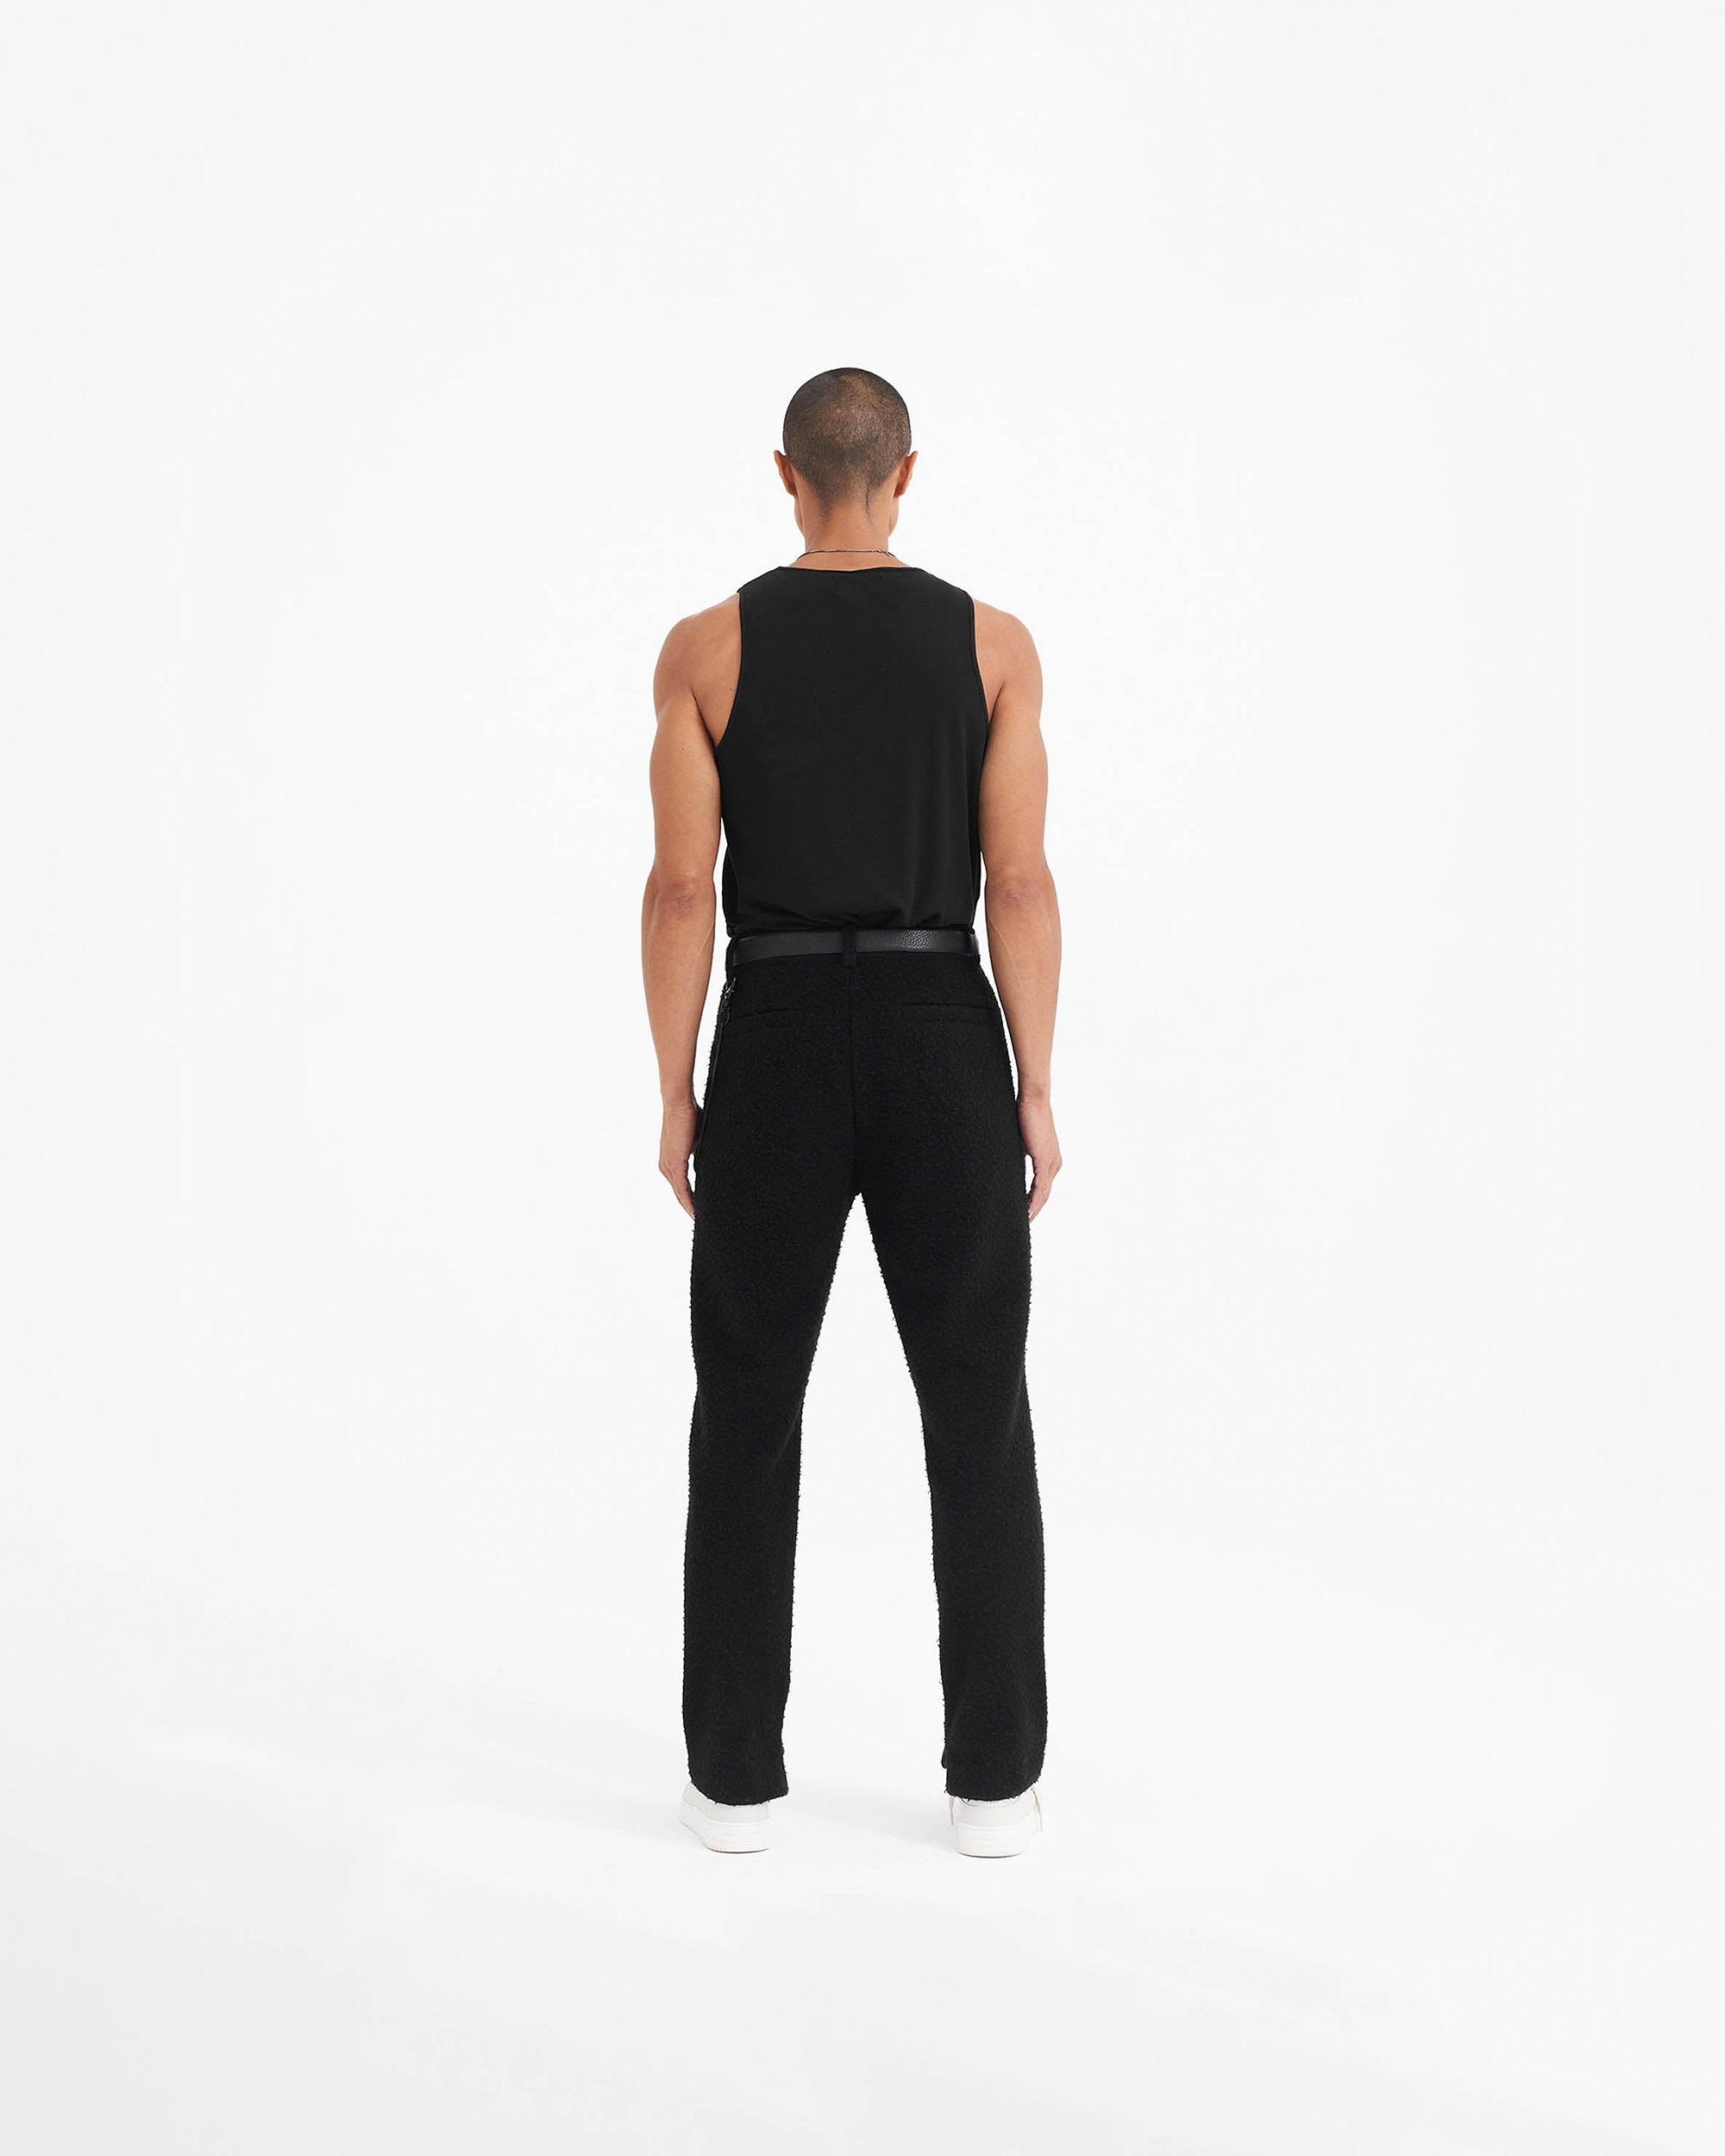 Textured Wool Tailored Pant | Black Pants FW22 | Represent Clo